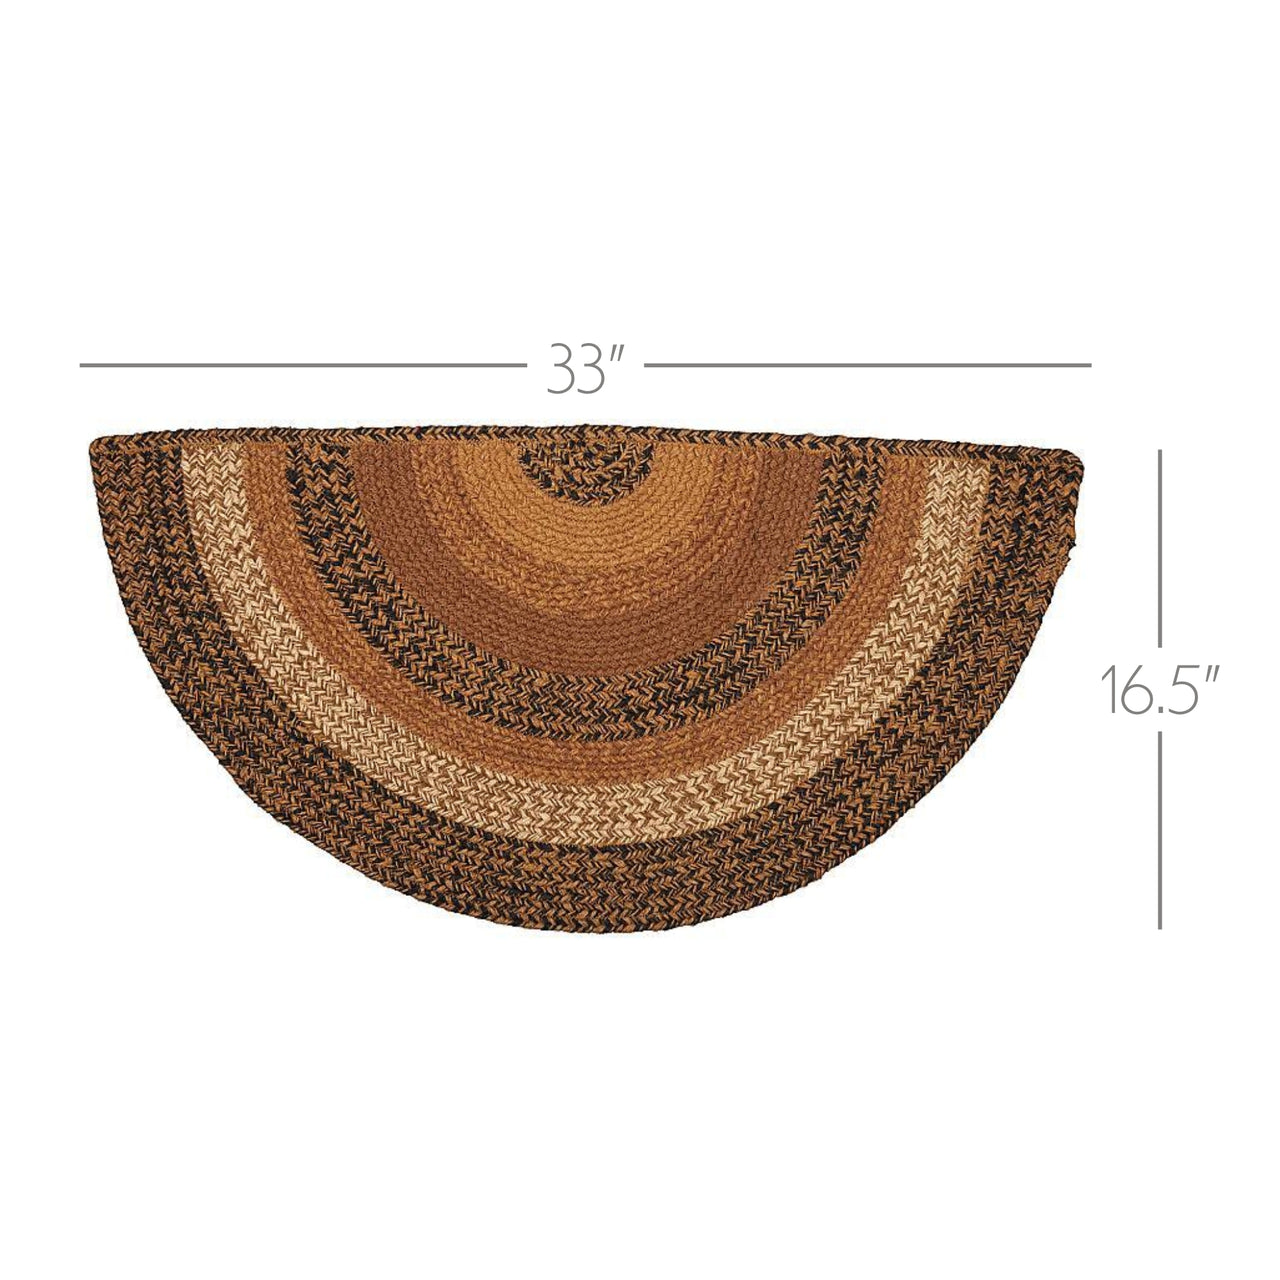 Kettle Grove Jute Braided Rug Half Circle 16.5"x33" with Rug Pad VHC Brands